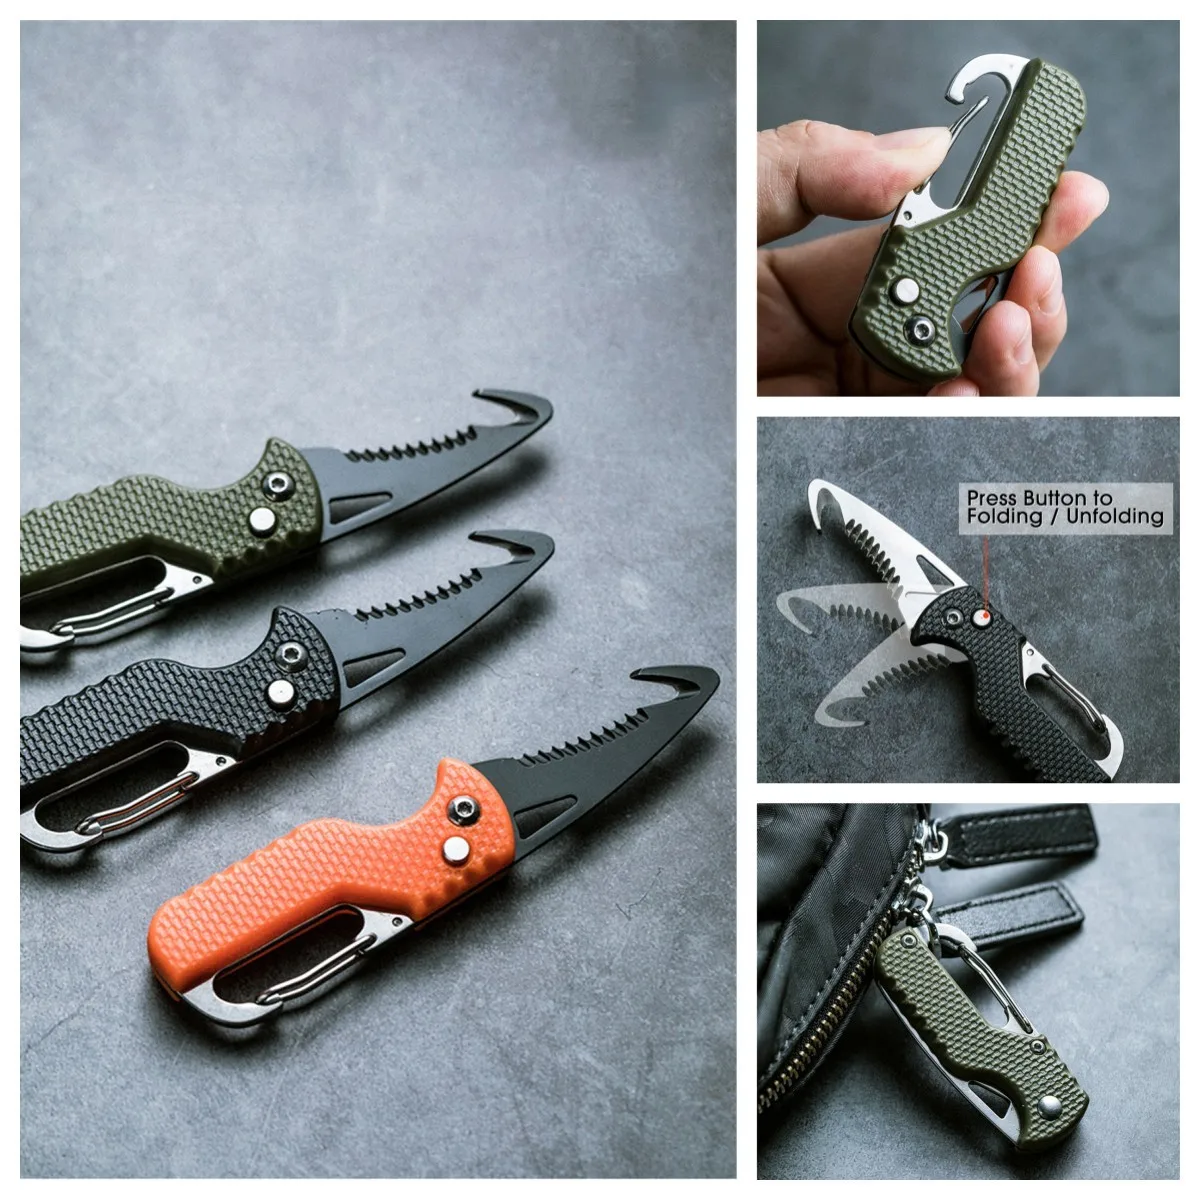 https://ae01.alicdn.com/kf/S2d81ed4276a5498c898e0ca020231959a/New-Small-Folding-Knife-Tactical-Knives-Camping-Fixed-Blade-Pocket-Set-Outdoor-Automatic-Portable-Outdoor-Gadhet.jpg